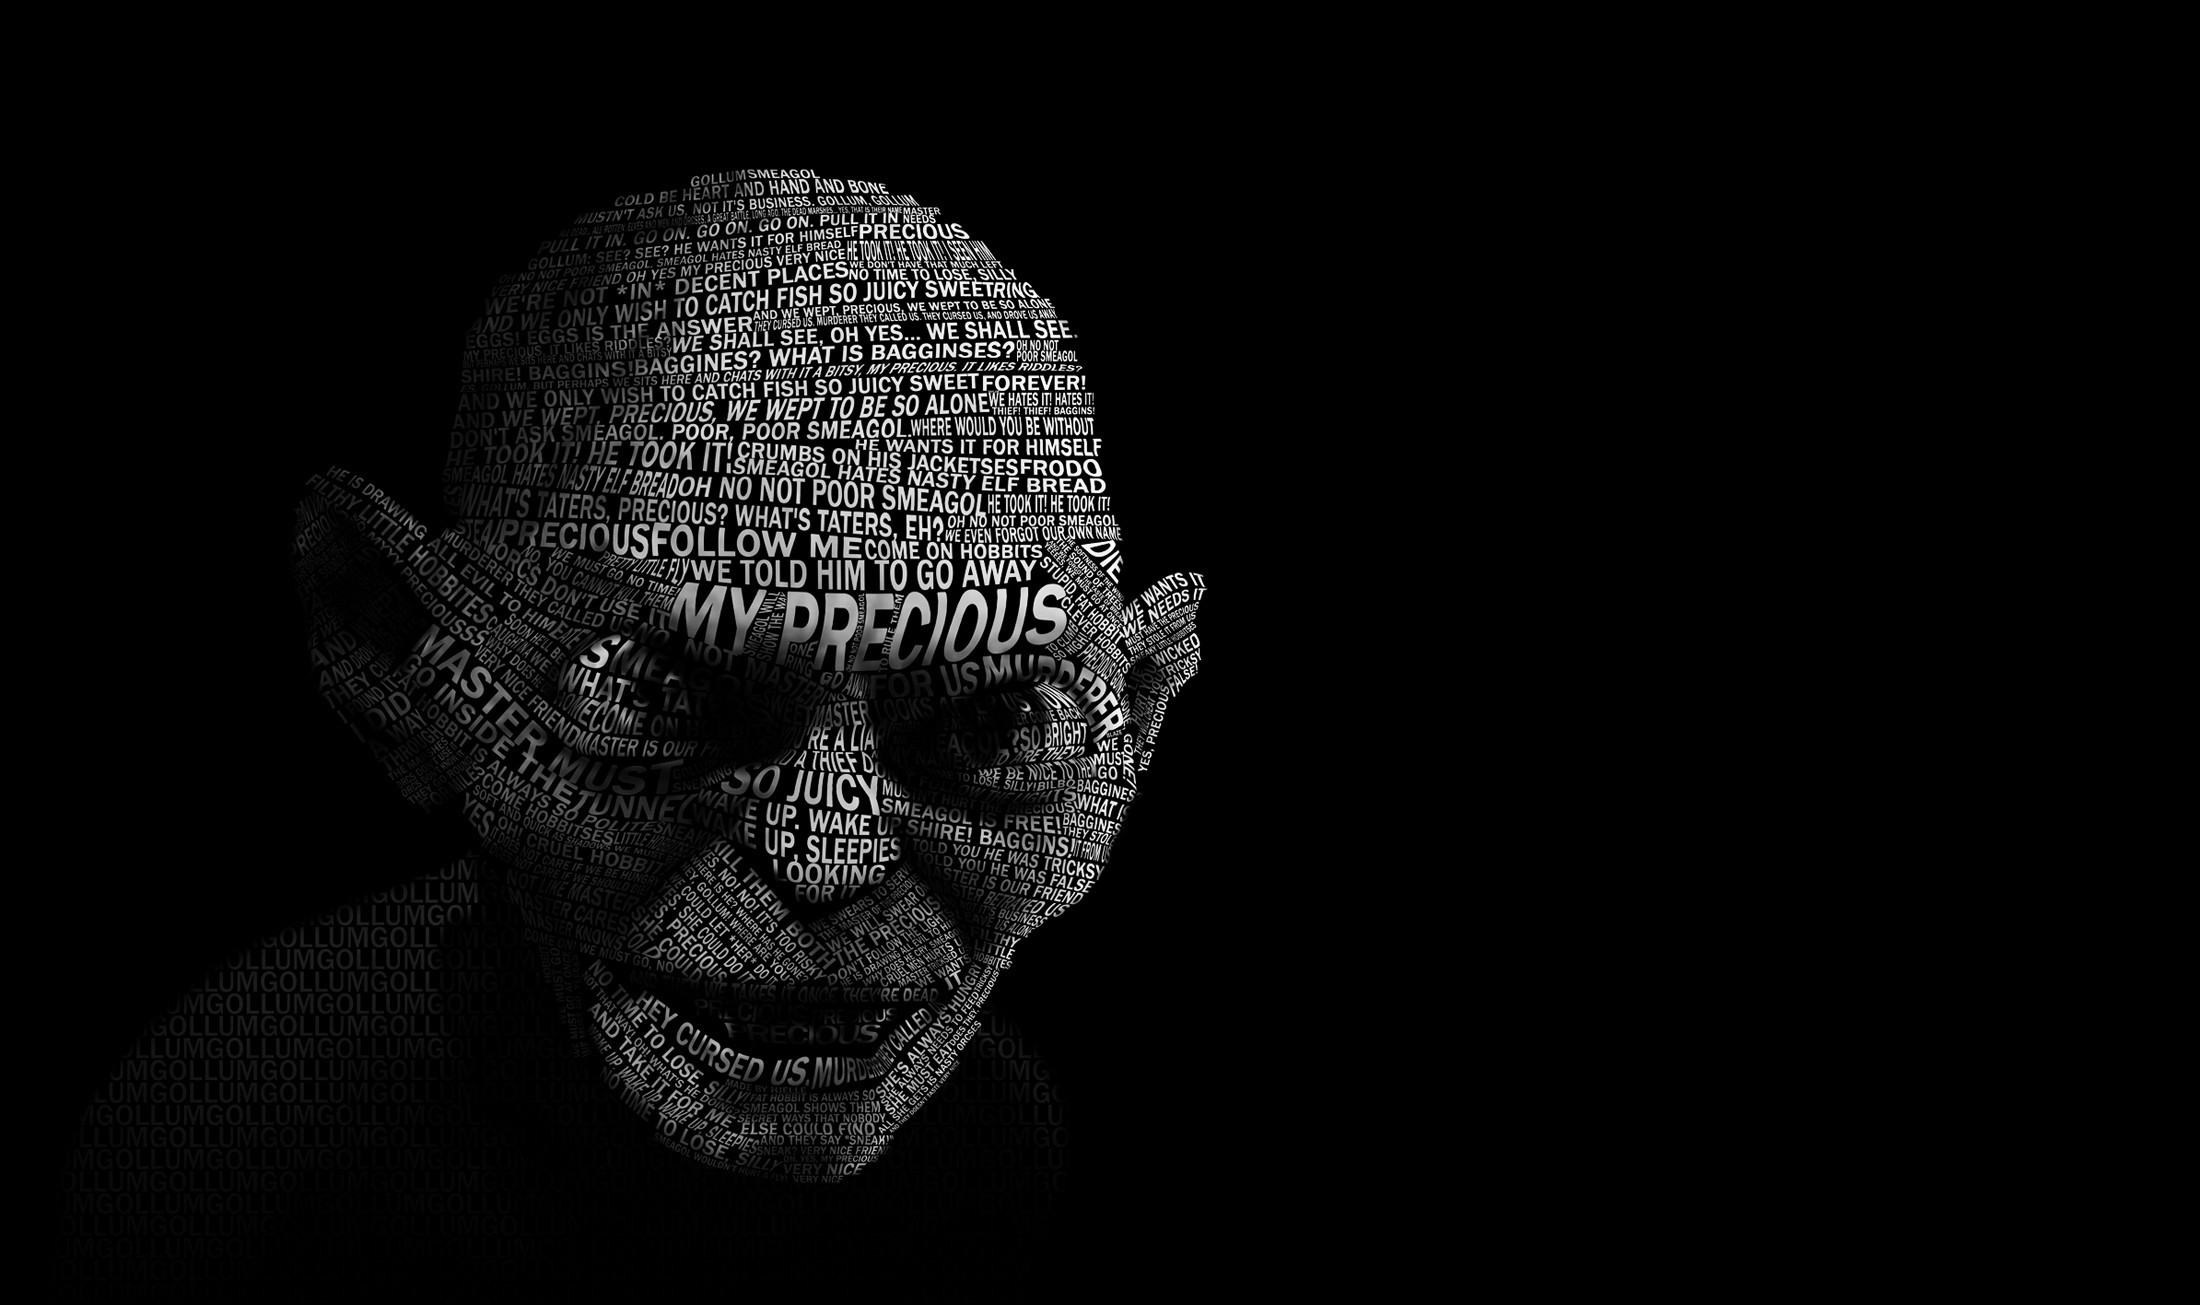 Gollum on black wallpaper wallpapers and images - wallpapers